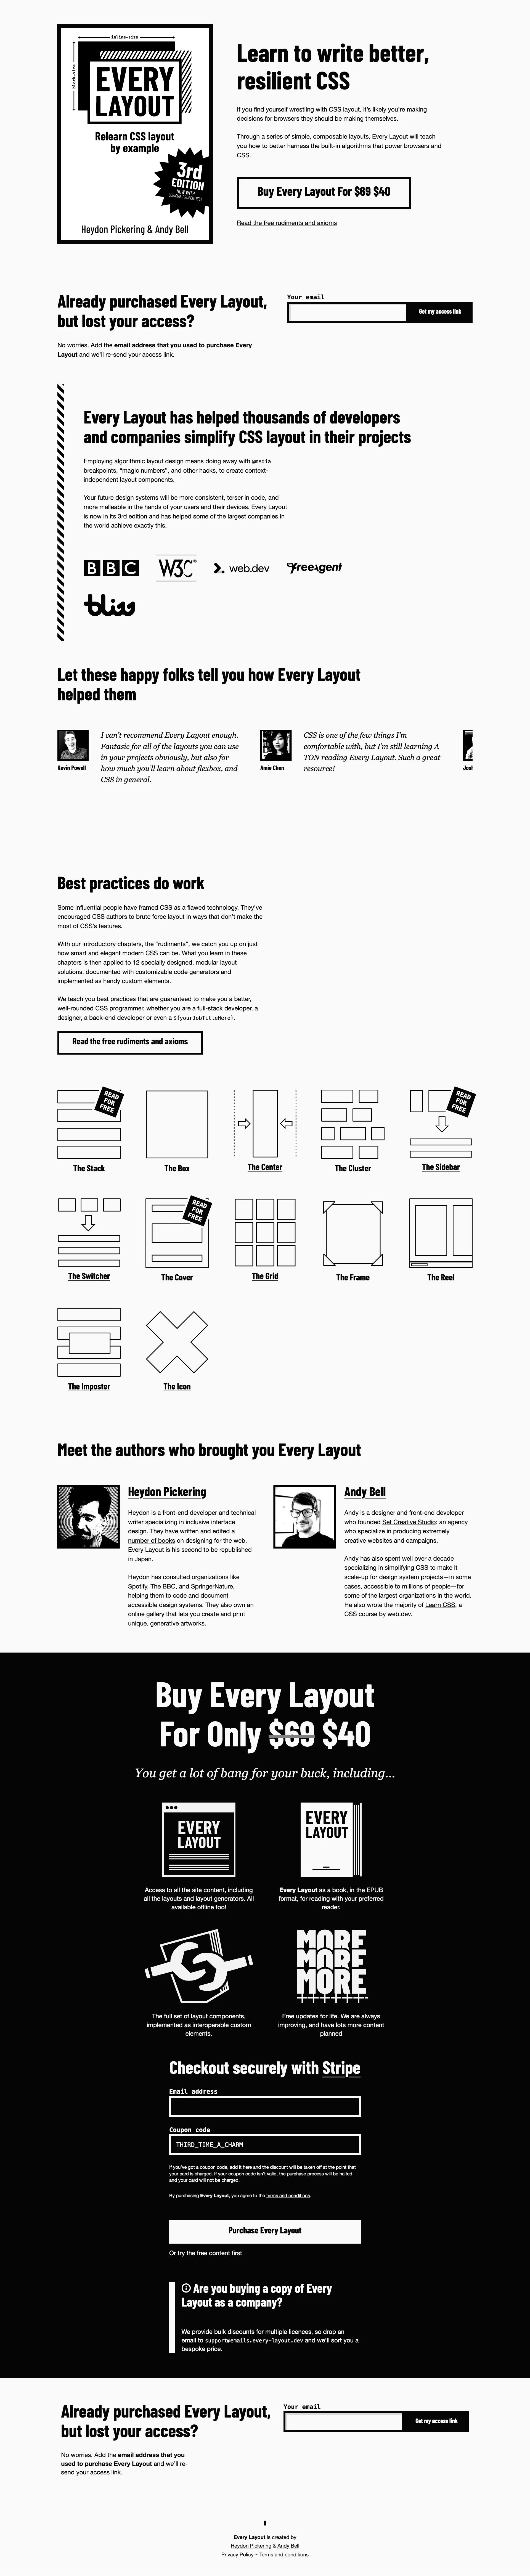 Every Layout Landing Page Example: If you find yourself wrestling with CSS layout, it’s likely you’re making decisions for browsers they should be making themselves. Through a series of simple, composable layouts, Every Layout will teach you how to better harness the built-in algorithms that power browsers and CSS.